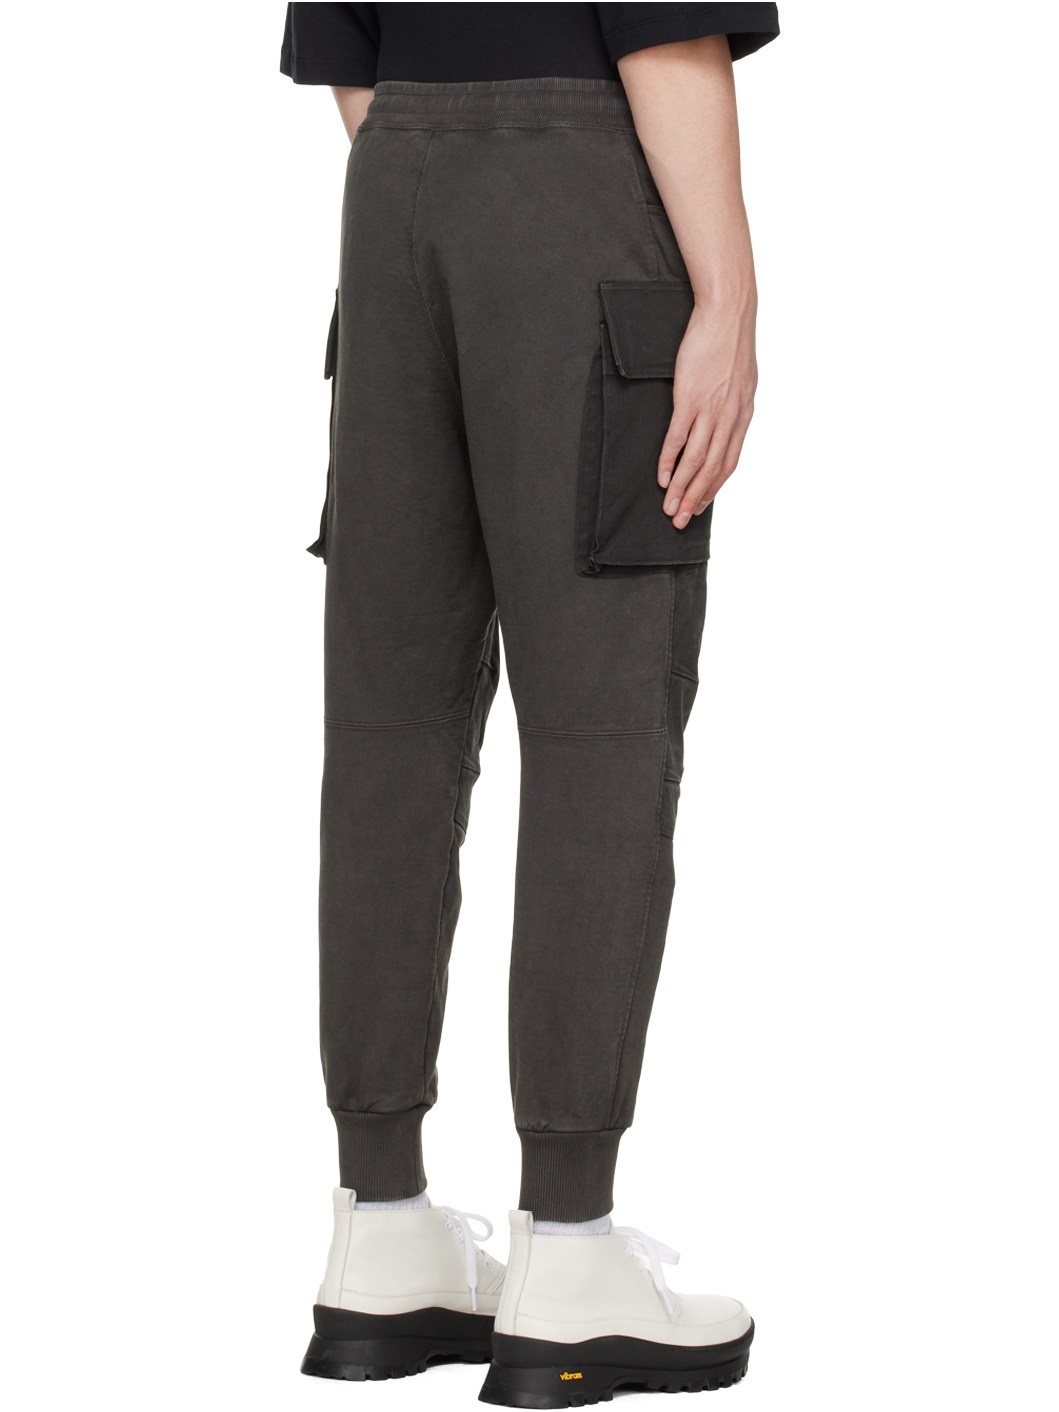 Gray Dyed Cargo Pants - 3